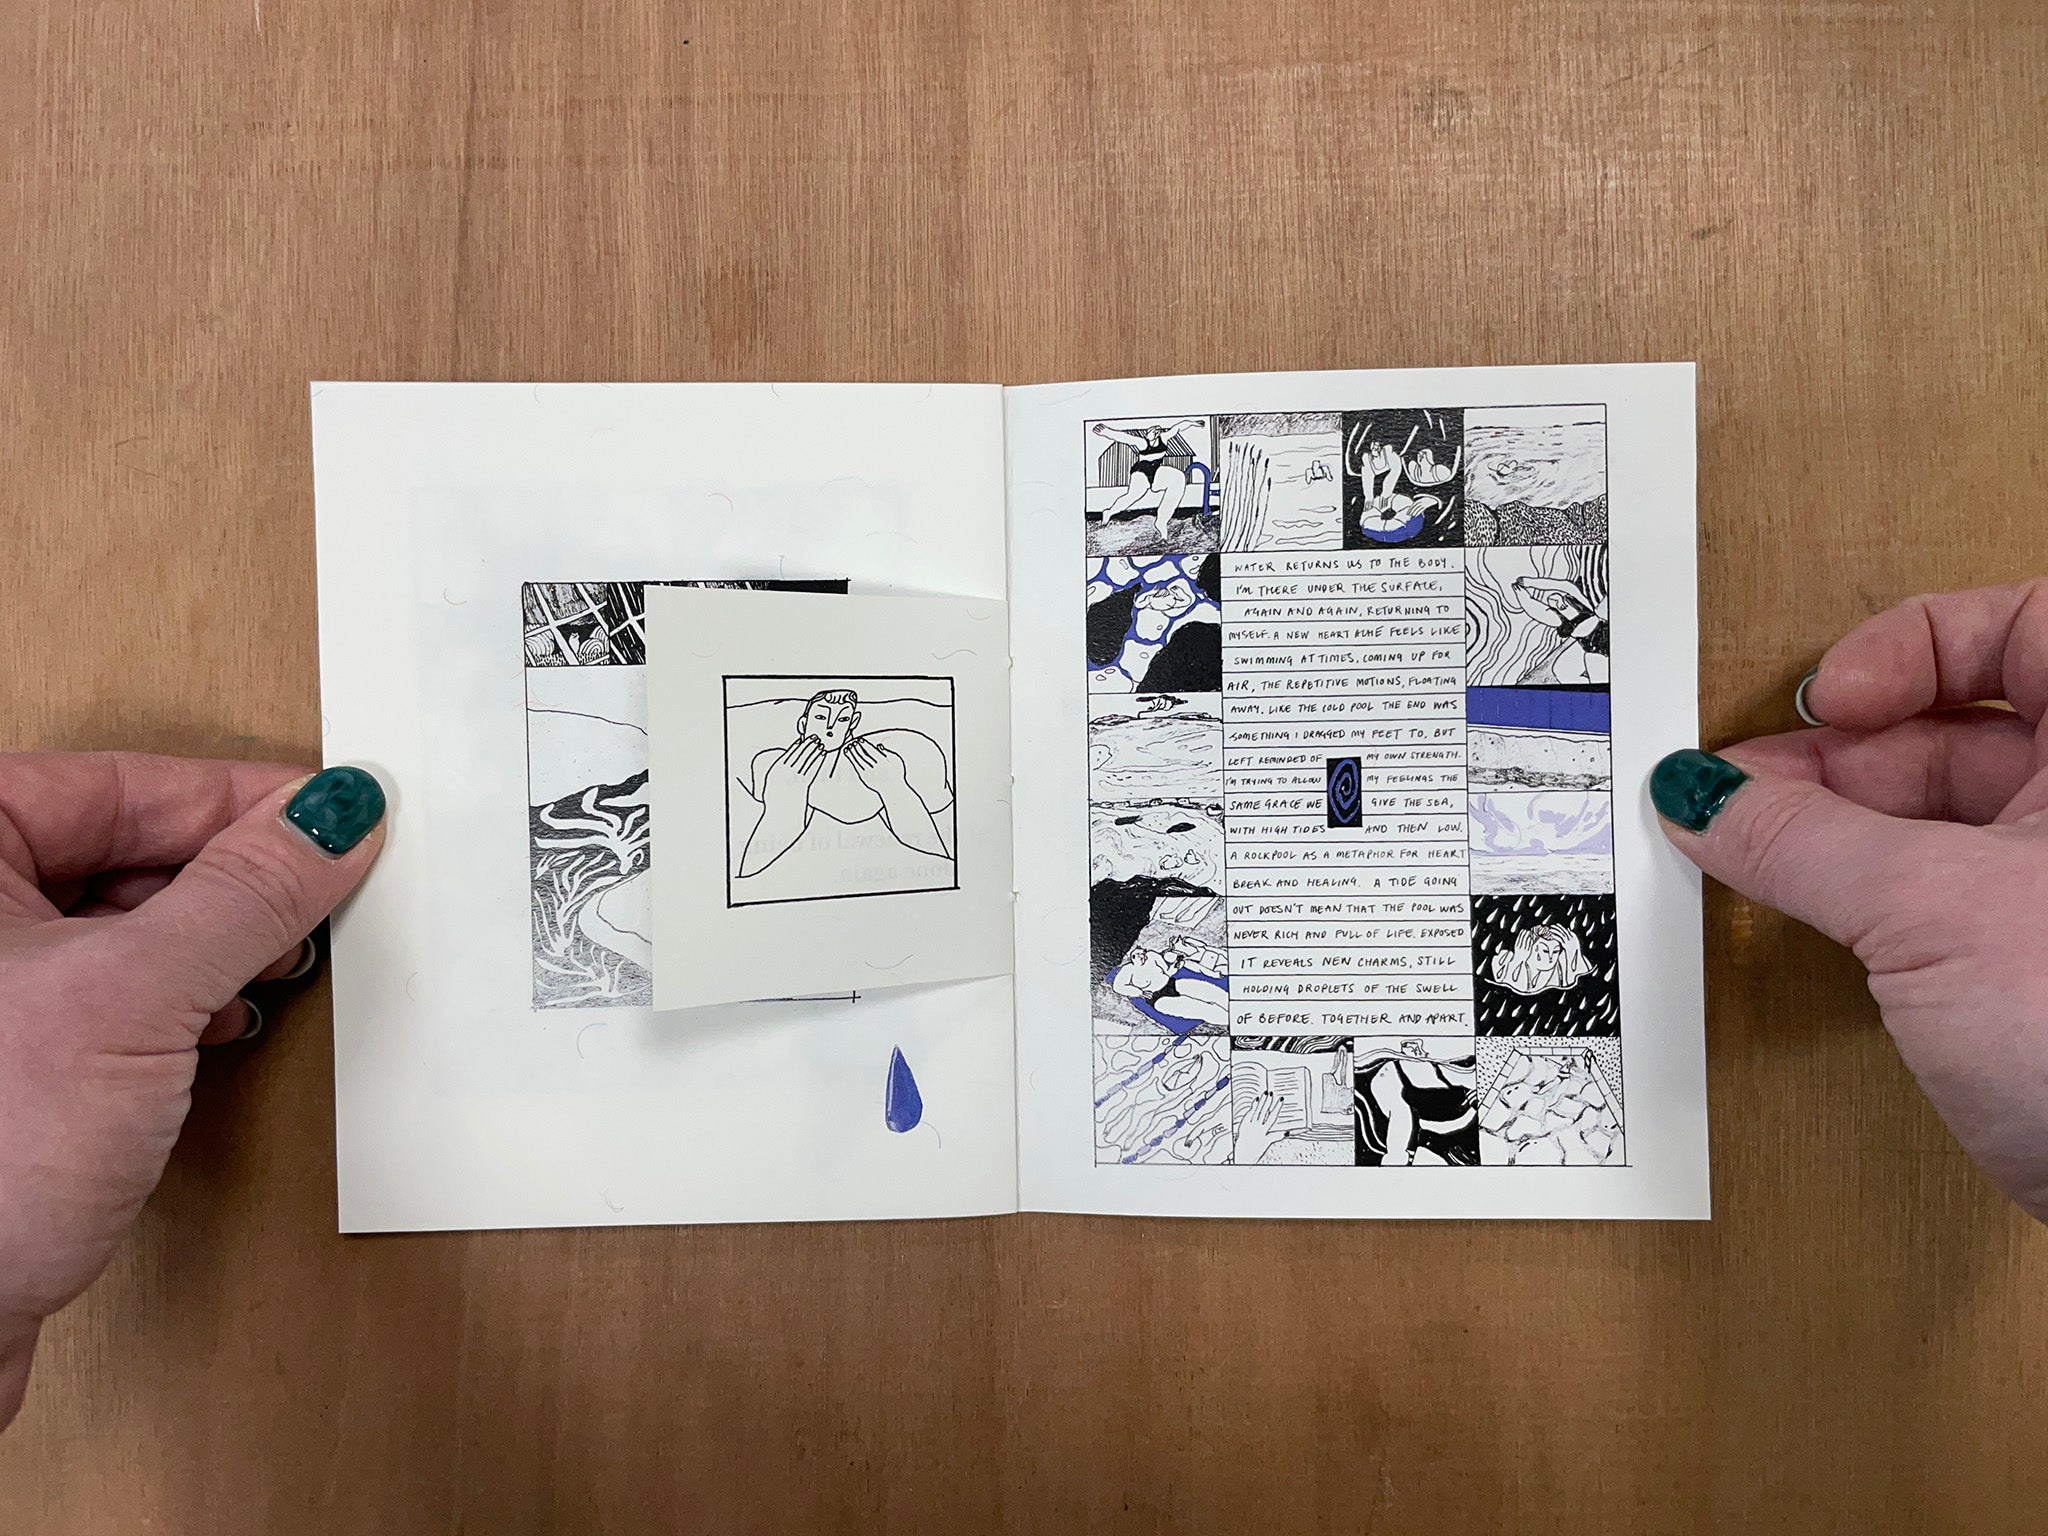 DRAWINGS FROM THE SEA by Lily Clementine Orset